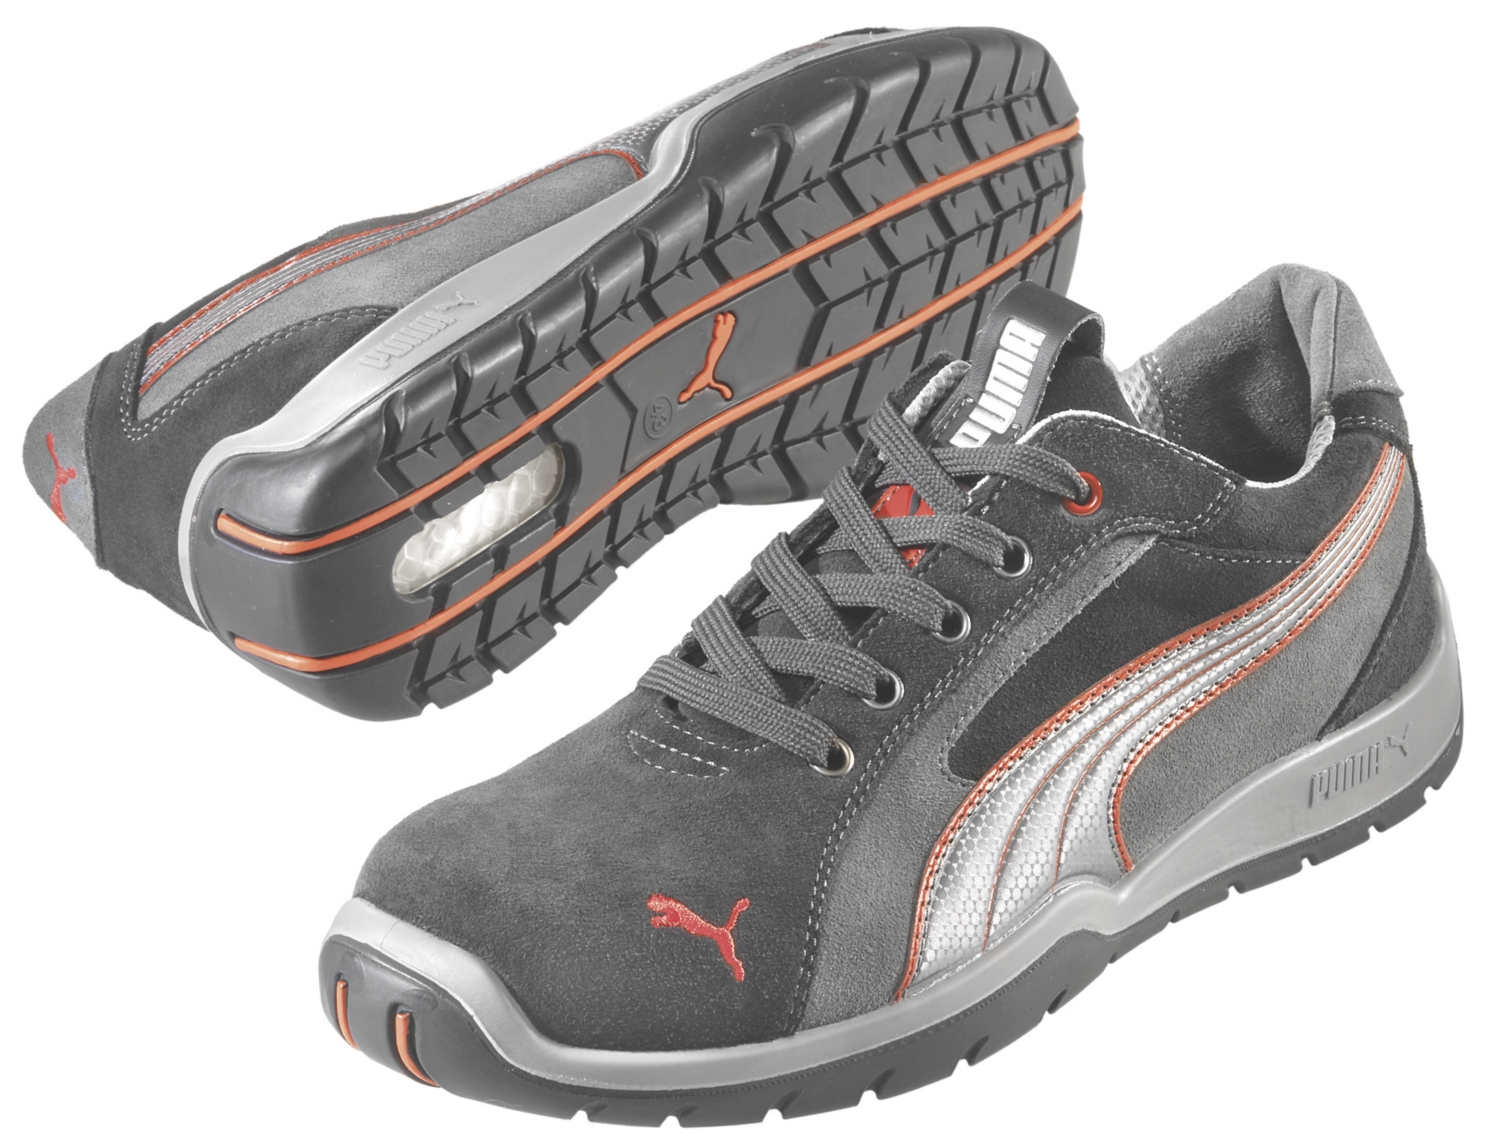 ism puma safety shoes